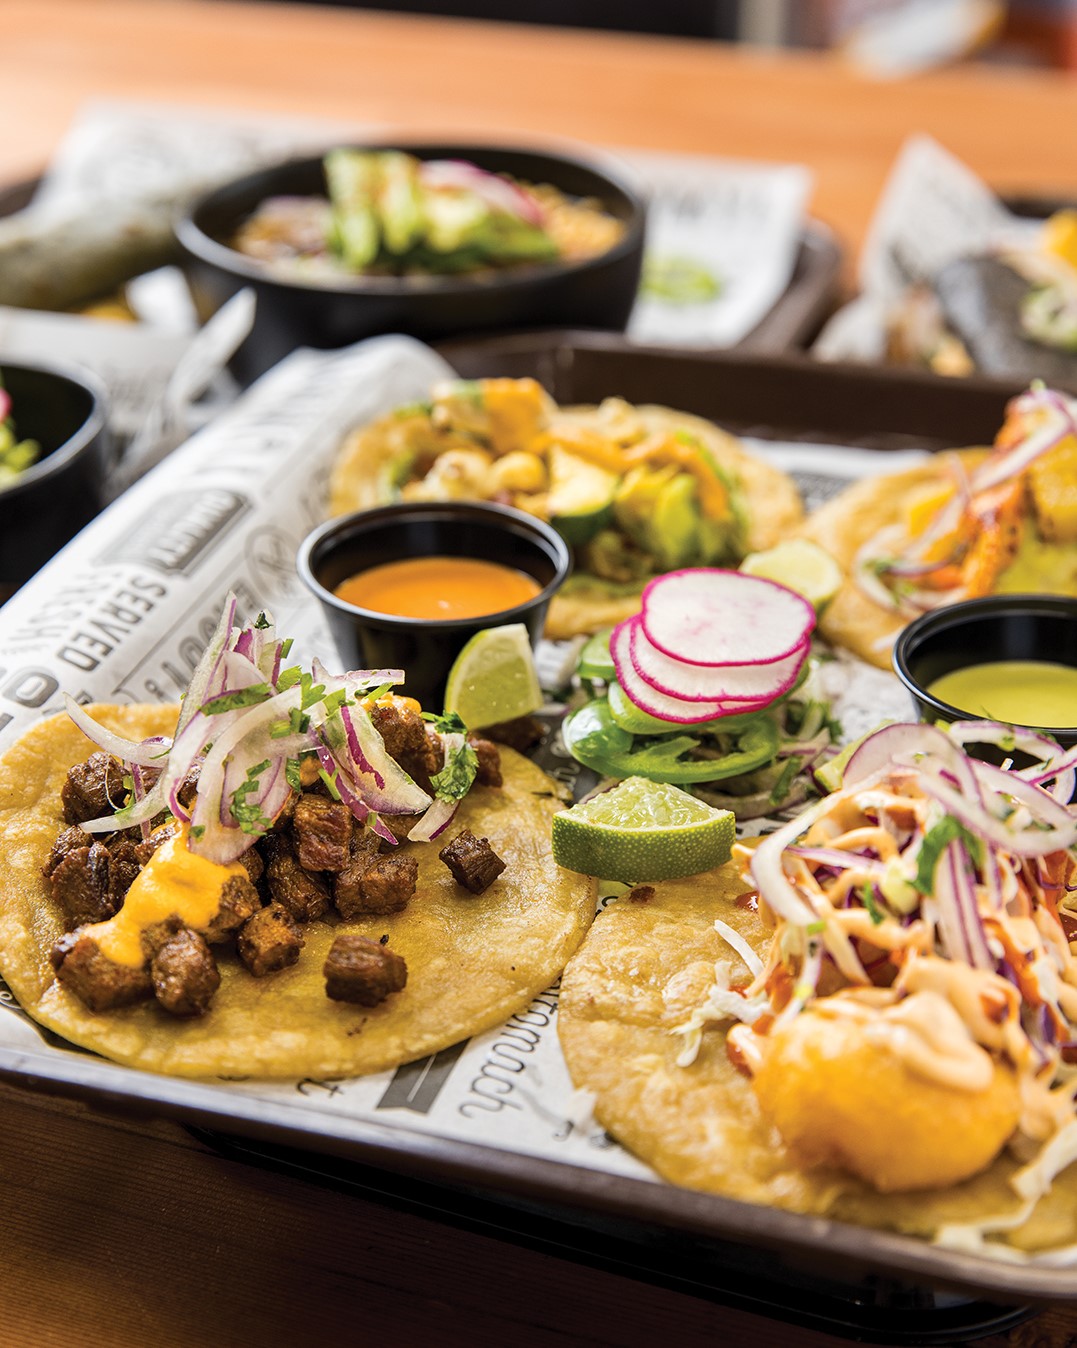 The menu offers a variety of tacos, including braised beef, chicken, grilled steak, shrimp, slow roasted pork and vegetable.